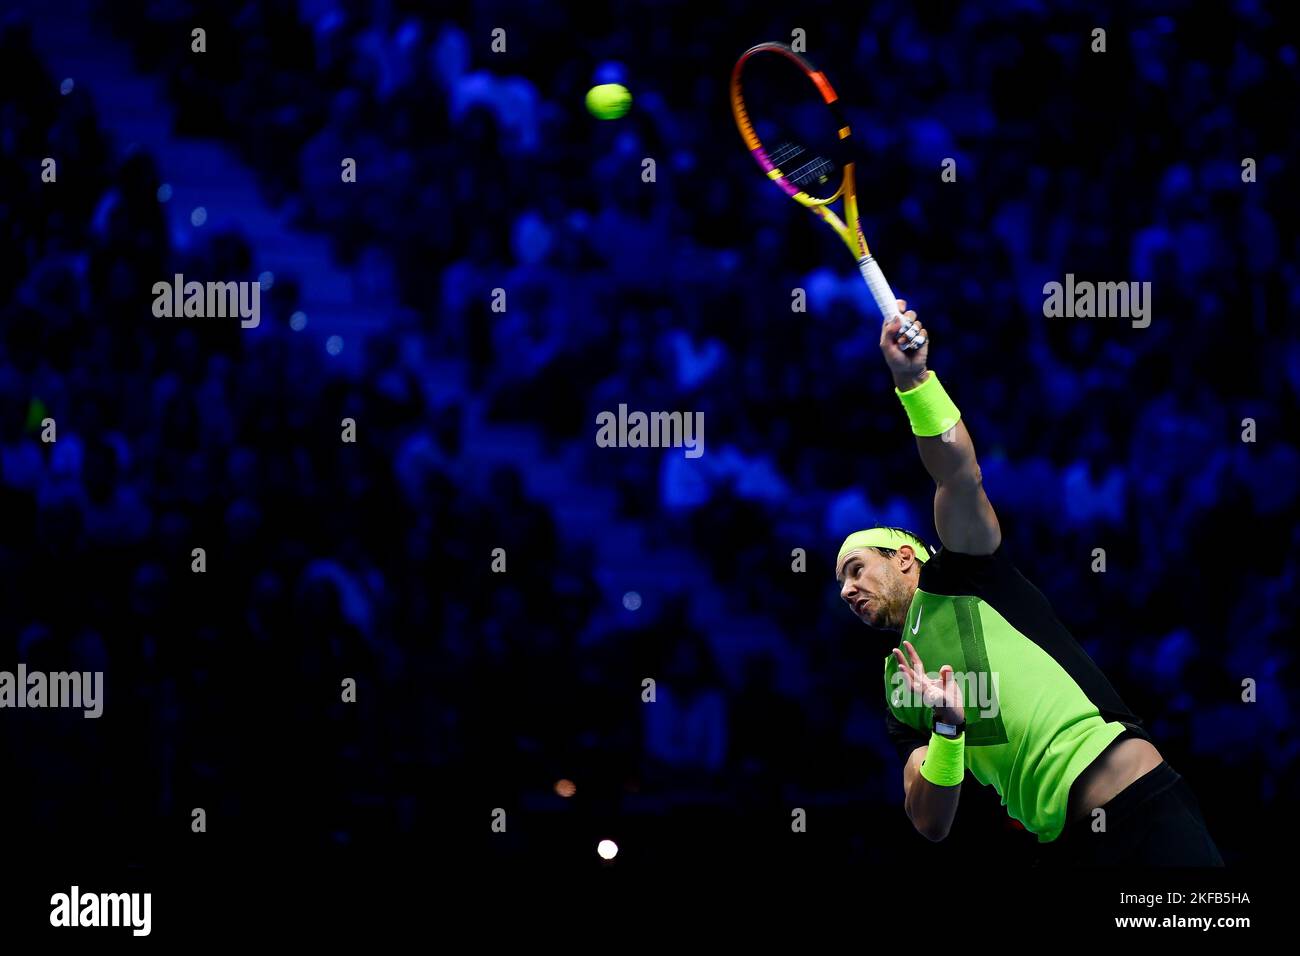 Turin, Italy. 17 November 2022. Rafael Nadal of Spain serves during his round robin match against Casper Ruud of Norway during day five of the Nitto ATP Finals. Rafael Nadal won the match 7-5, 7-5. Credit: Nicolò Campo/Alamy Live News Stock Photo